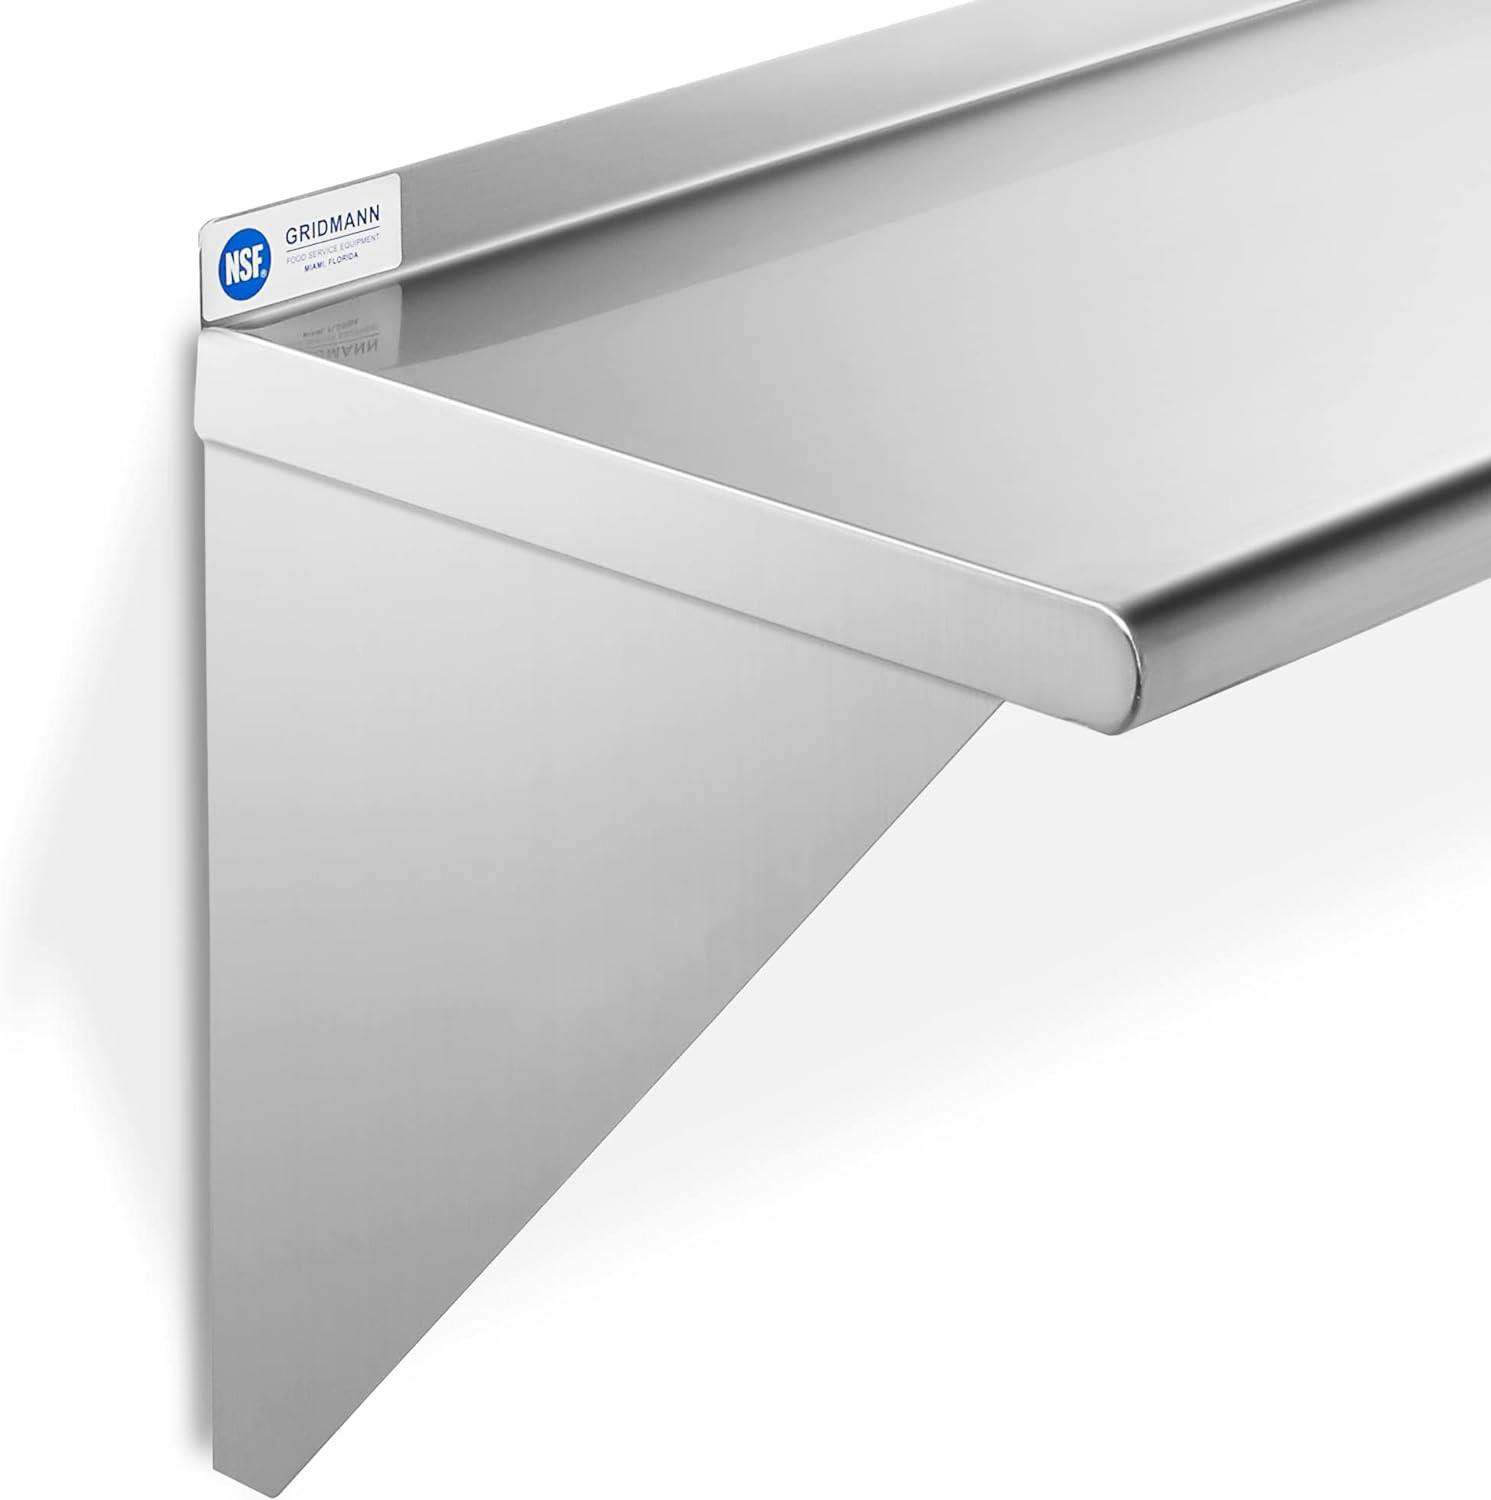 MaxiSpace 48" Silver Stainless Steel Commercial Kitchen Wall Shelf